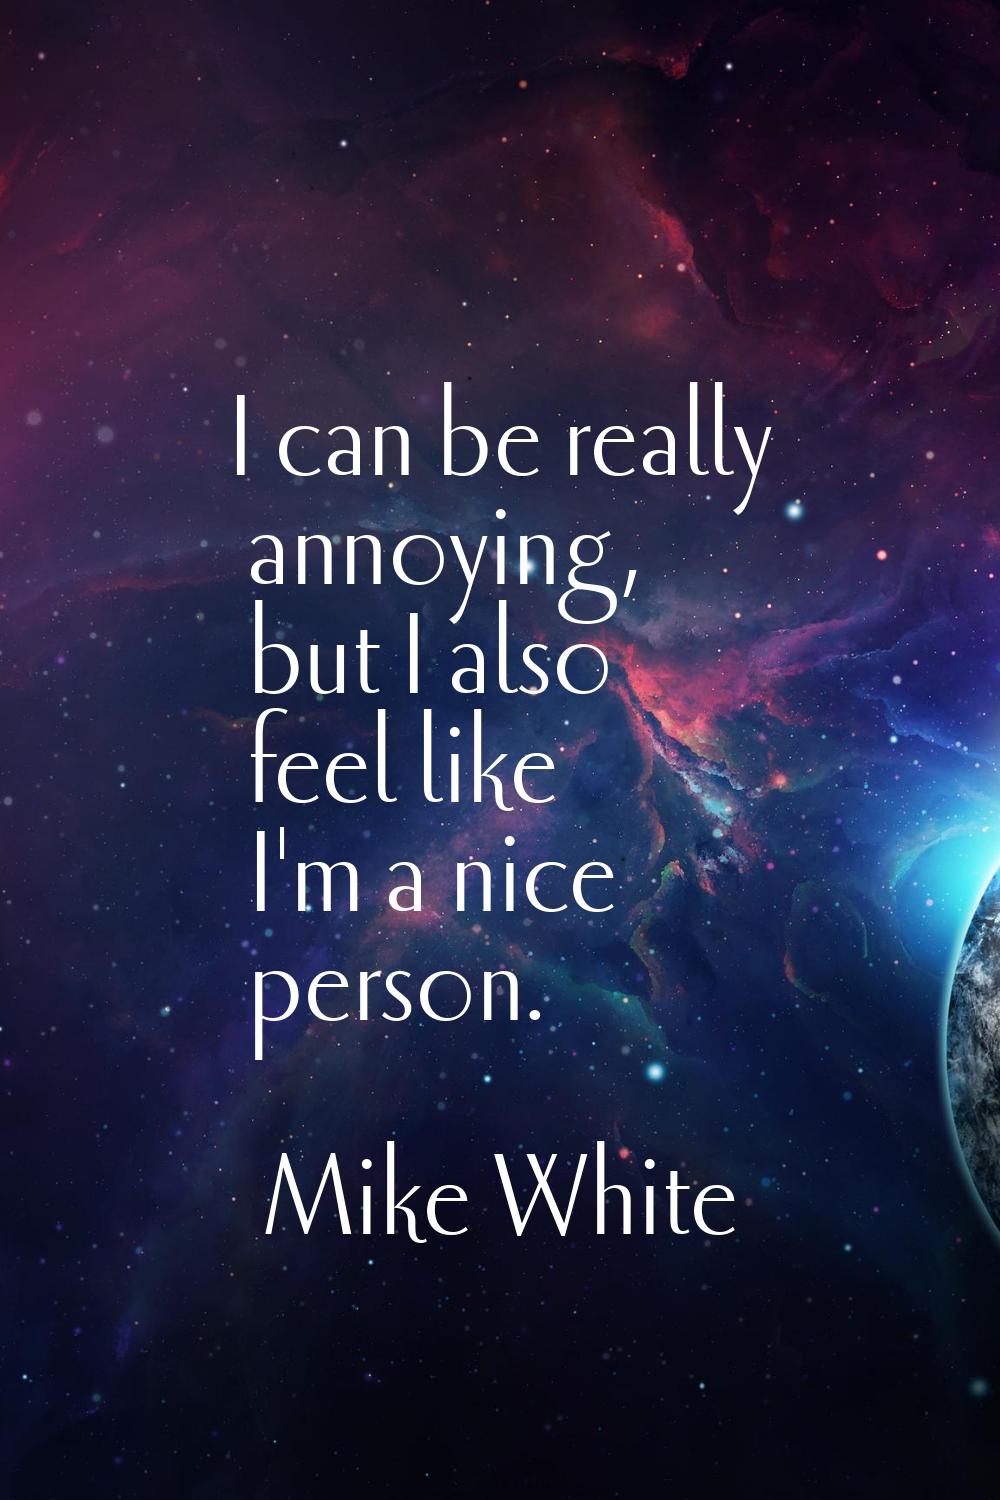 I can be really annoying, but I also feel like I'm a nice person.